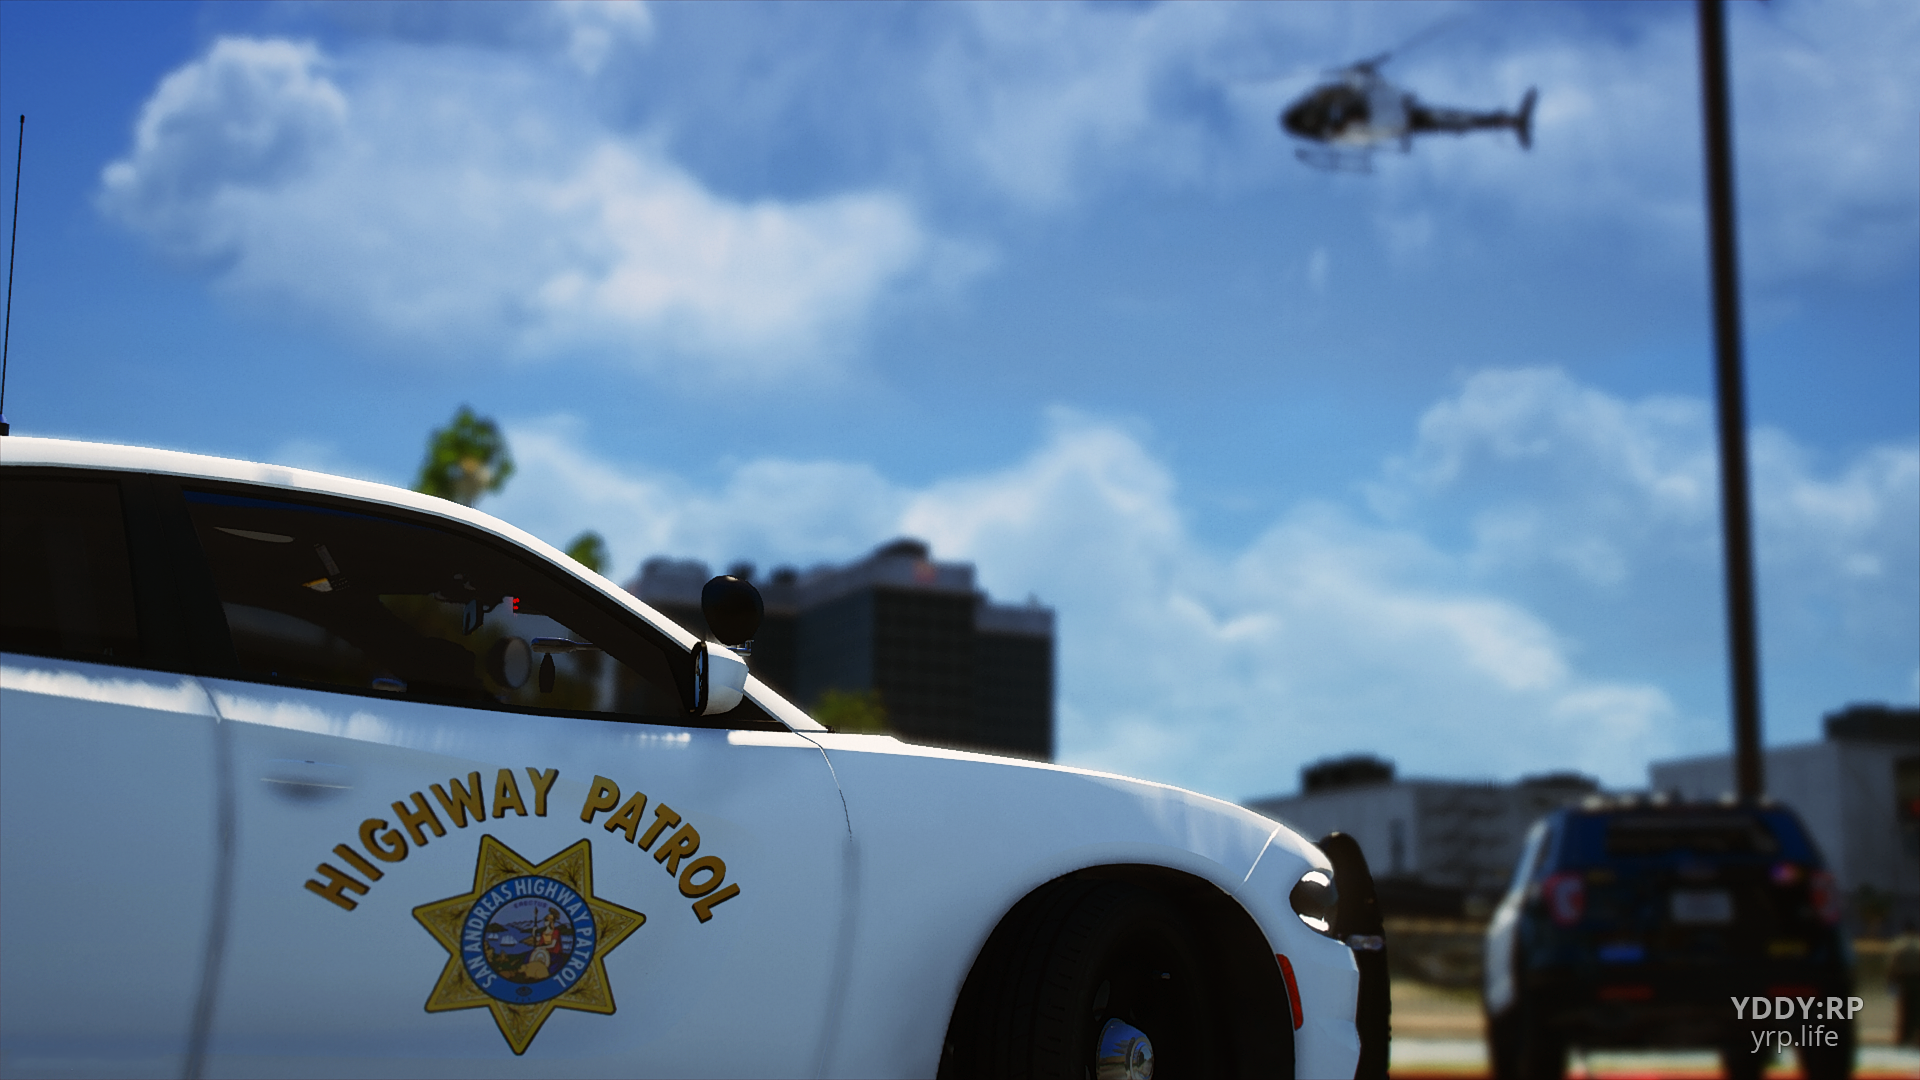 LSPD or SAHP?